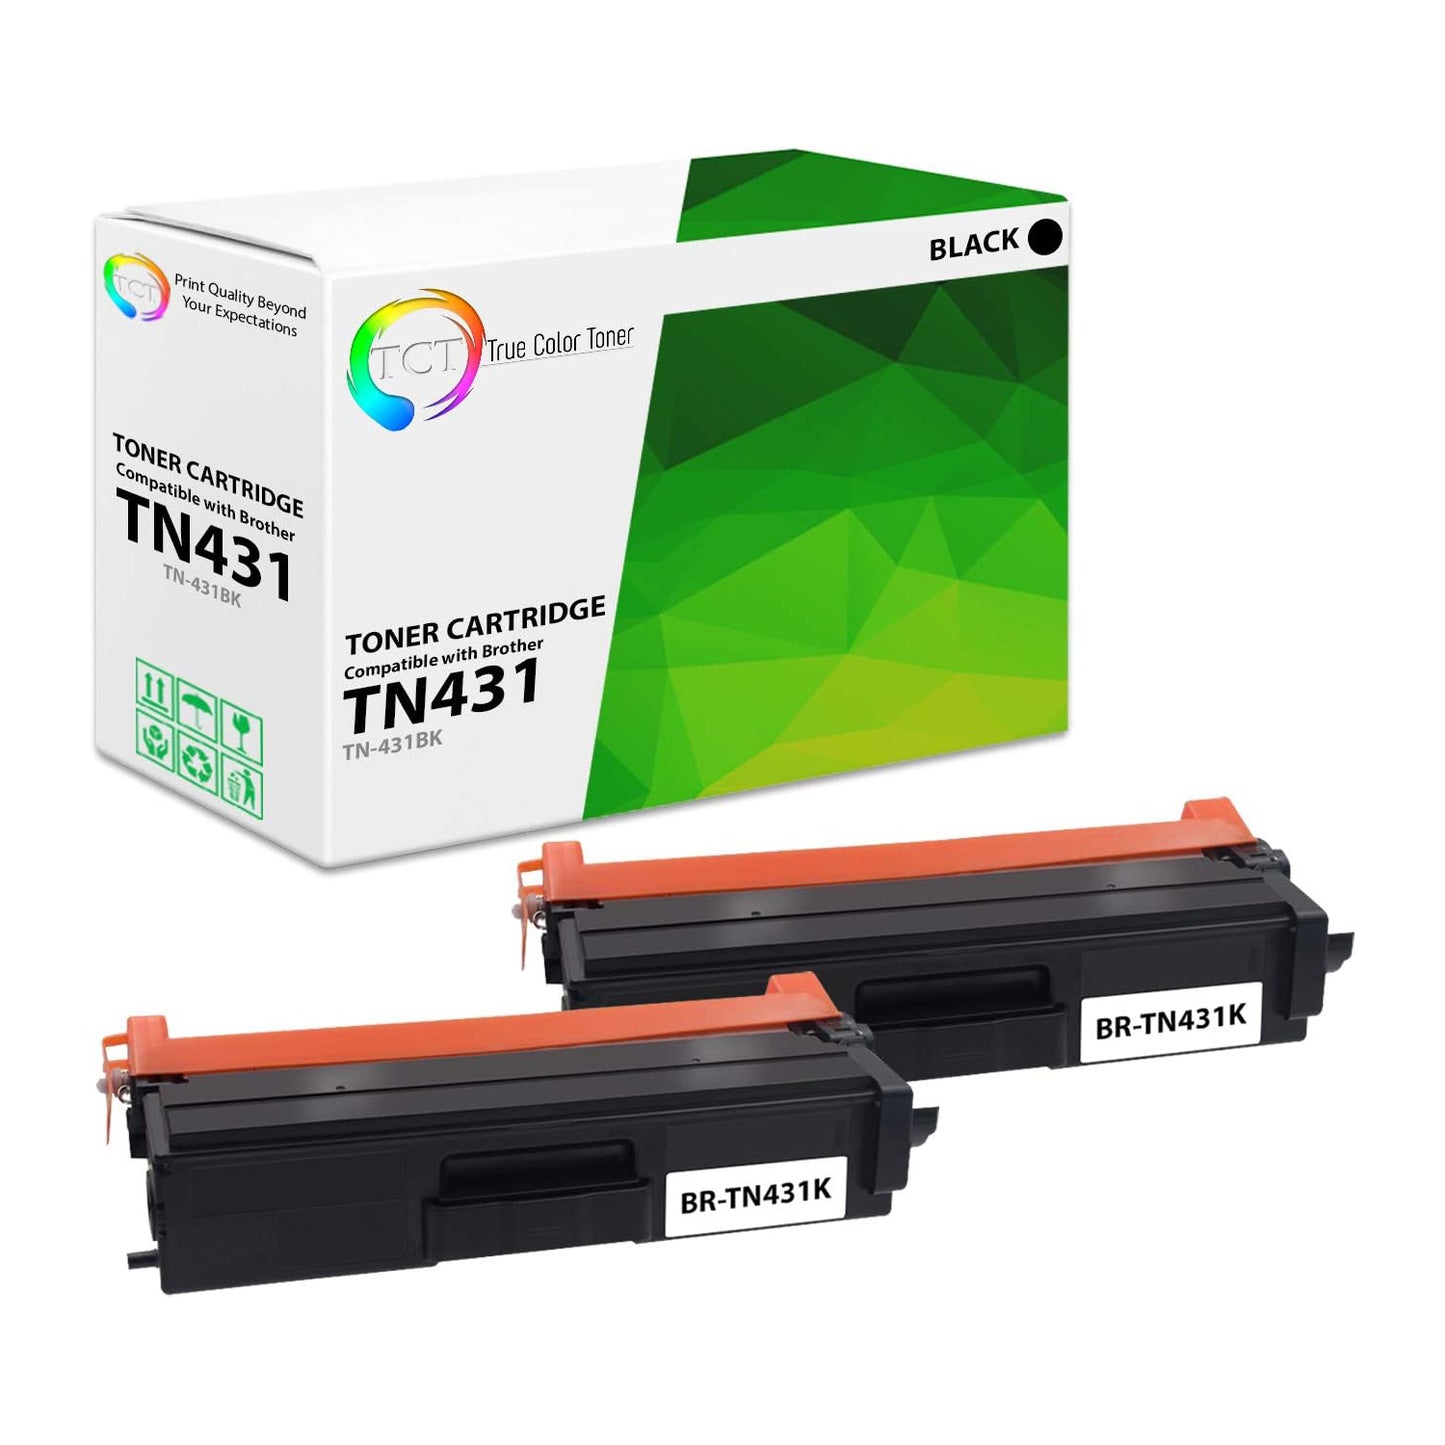 TCT Compatible Toner Cartridge Replacement for the Brother TN431 Series - 2 Pack Black